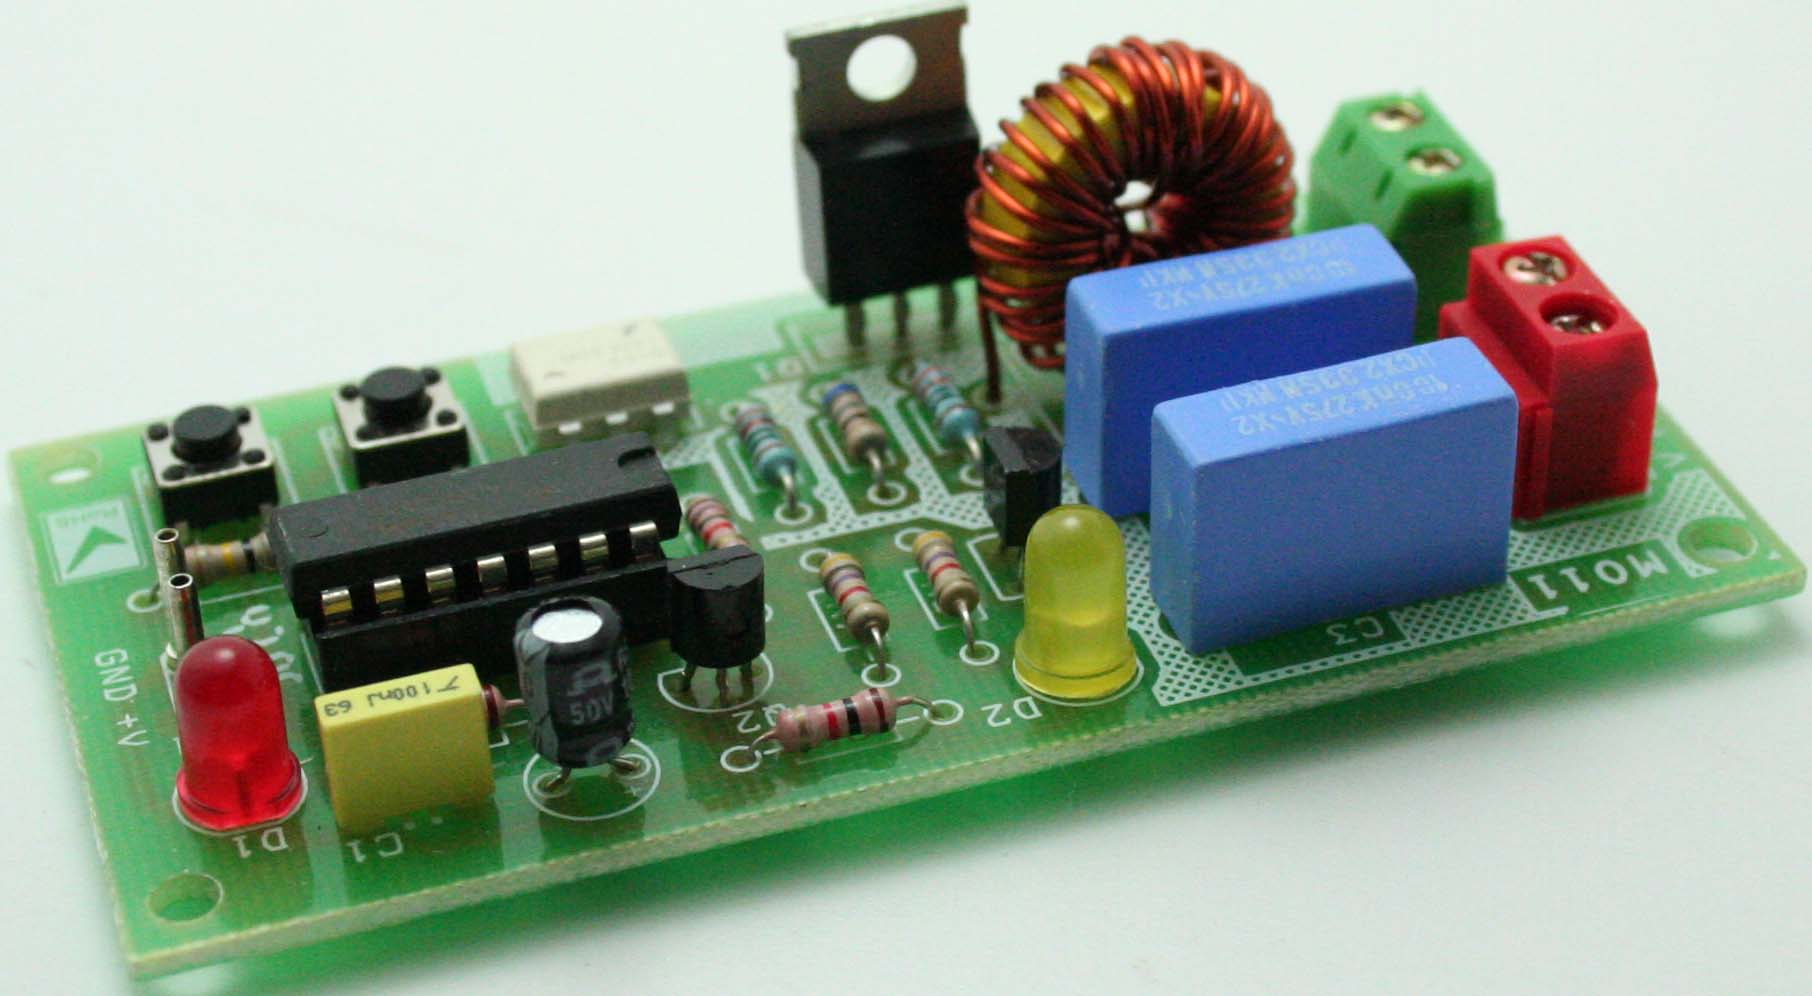 SOLID STATE AC RELAY WITH DIGITAL TOGLE SWITCH FOR INDUCTIVE AND RESISITIVE LOADS (1)